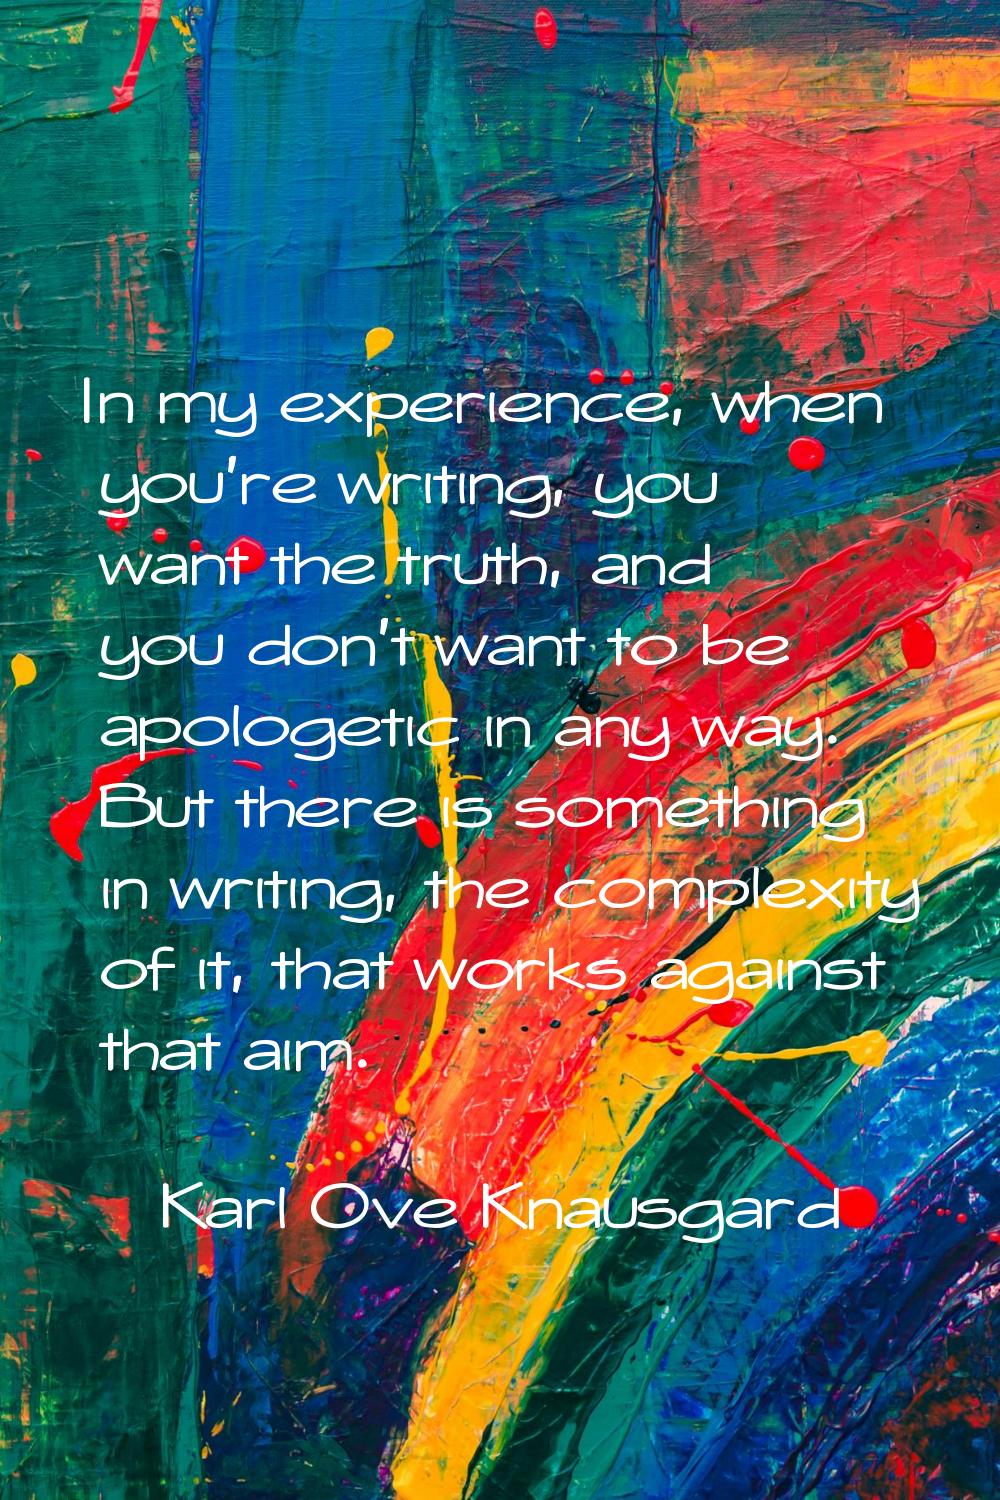 In my experience, when you're writing, you want the truth, and you don't want to be apologetic in a